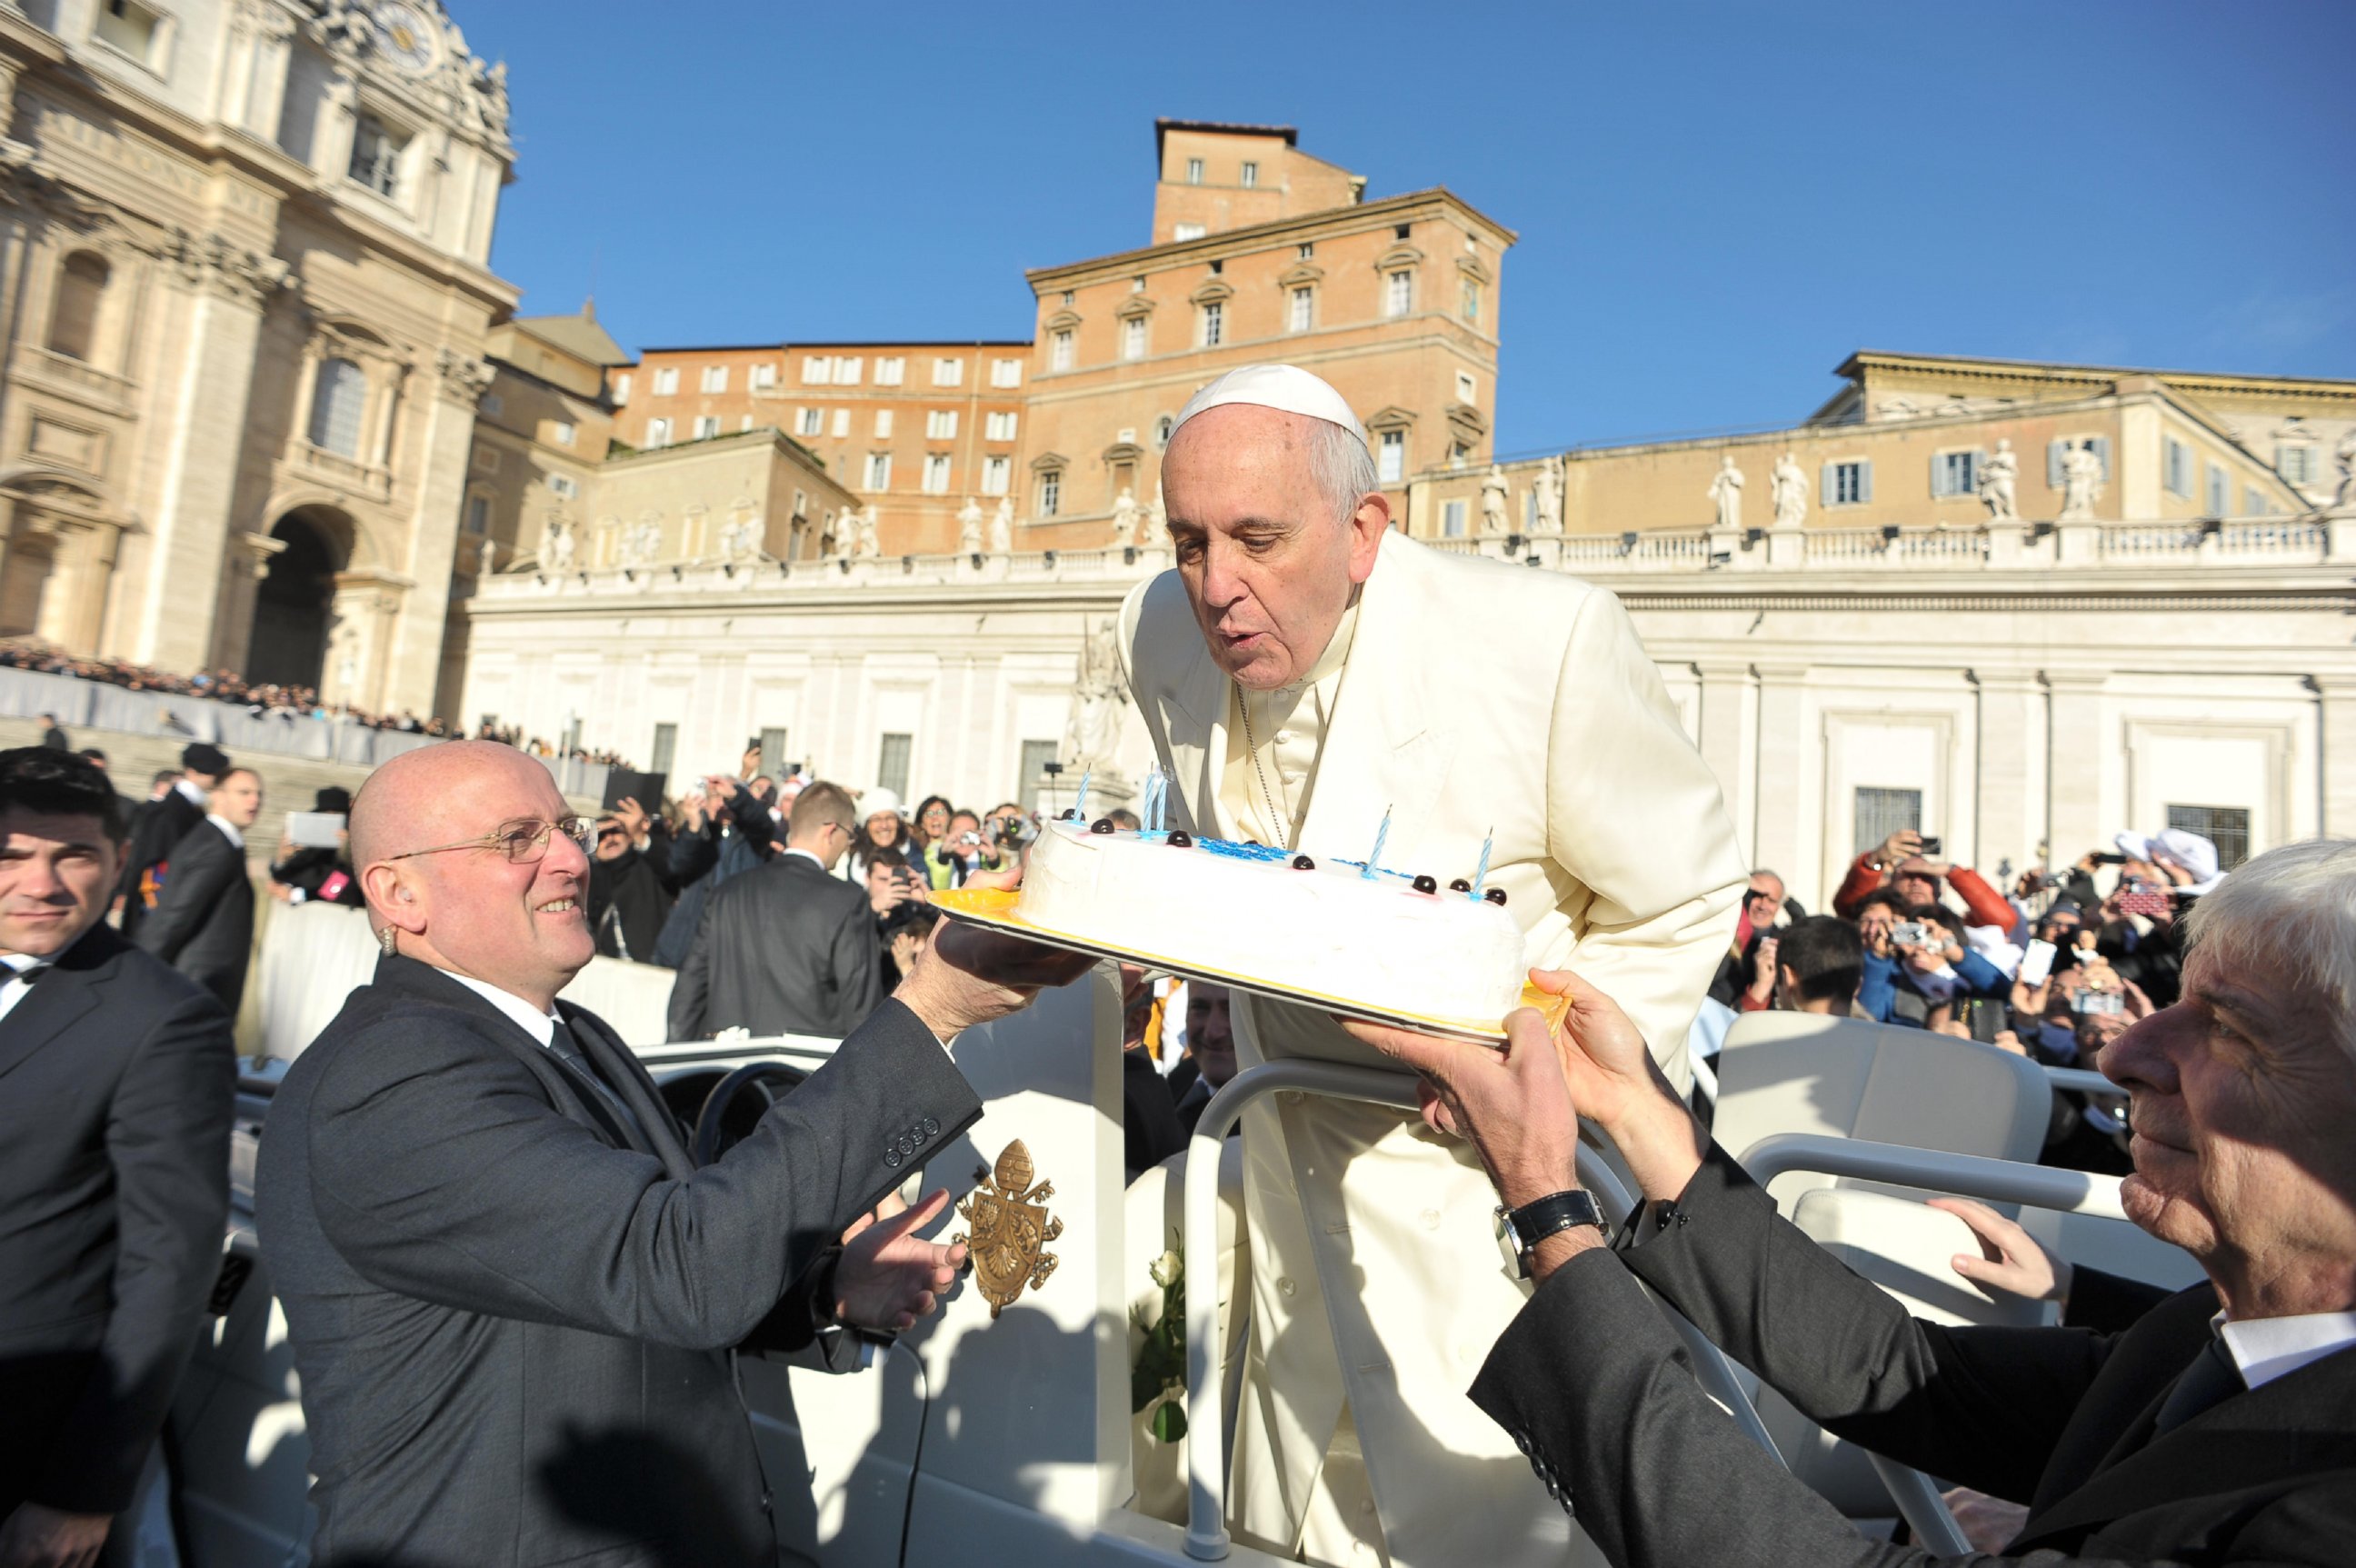 PHOTO: In this photo provided by Vatican newspaper L'Osservatore Romano, Pope Francis blows candles on a cake during his weekly general audience in St. Peter's Square at the Vatican on Dec. 17, 2014.